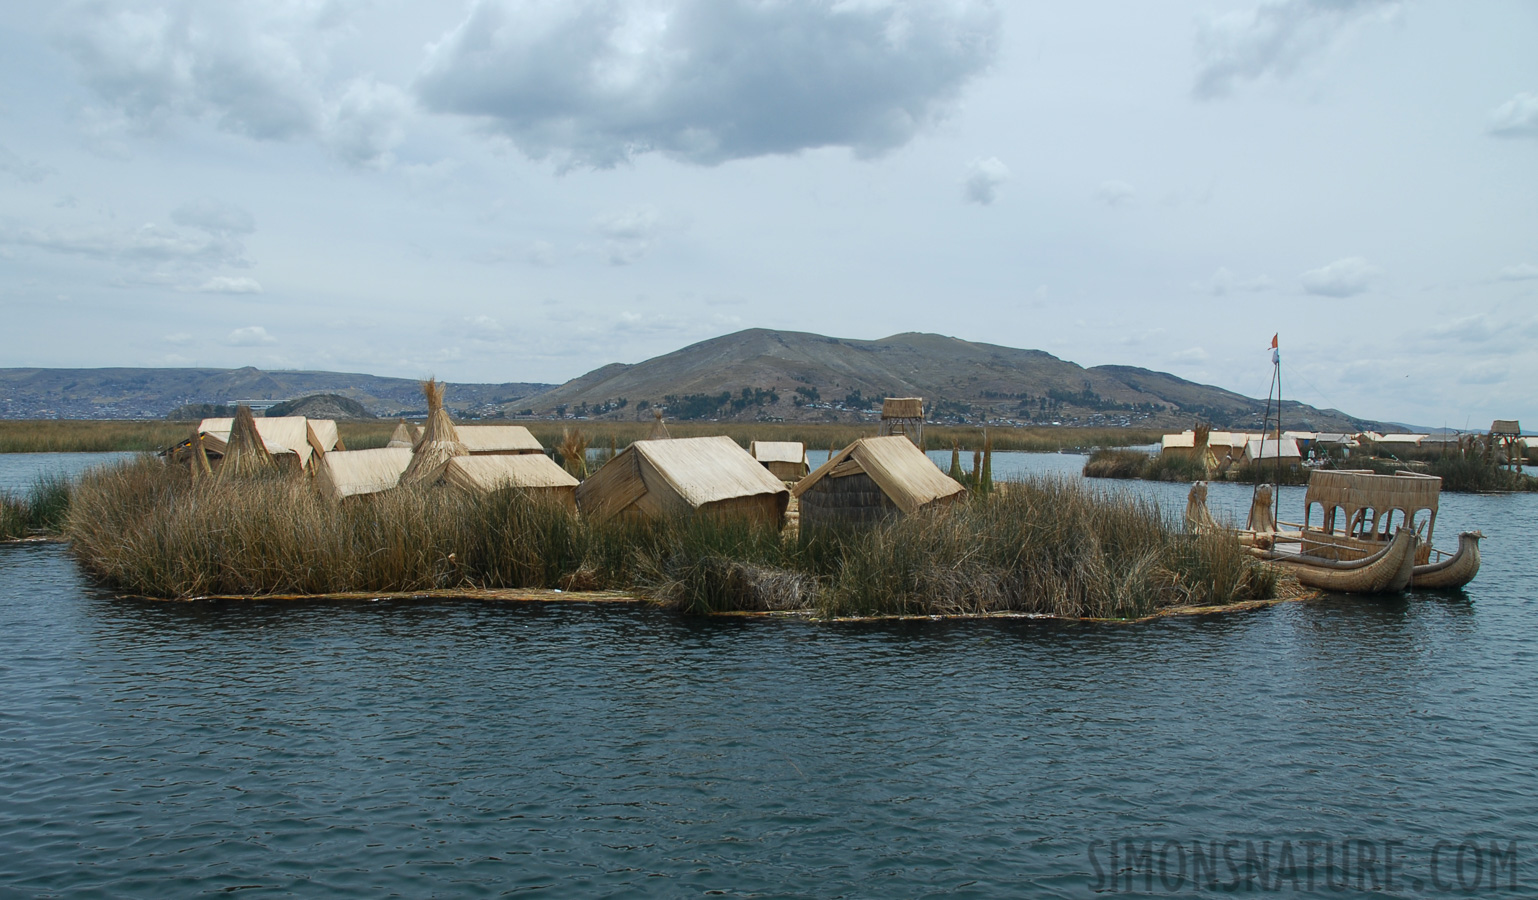 Lake Titicaca [18 mm, 1/250 sec at f / 8.0, ISO 100]